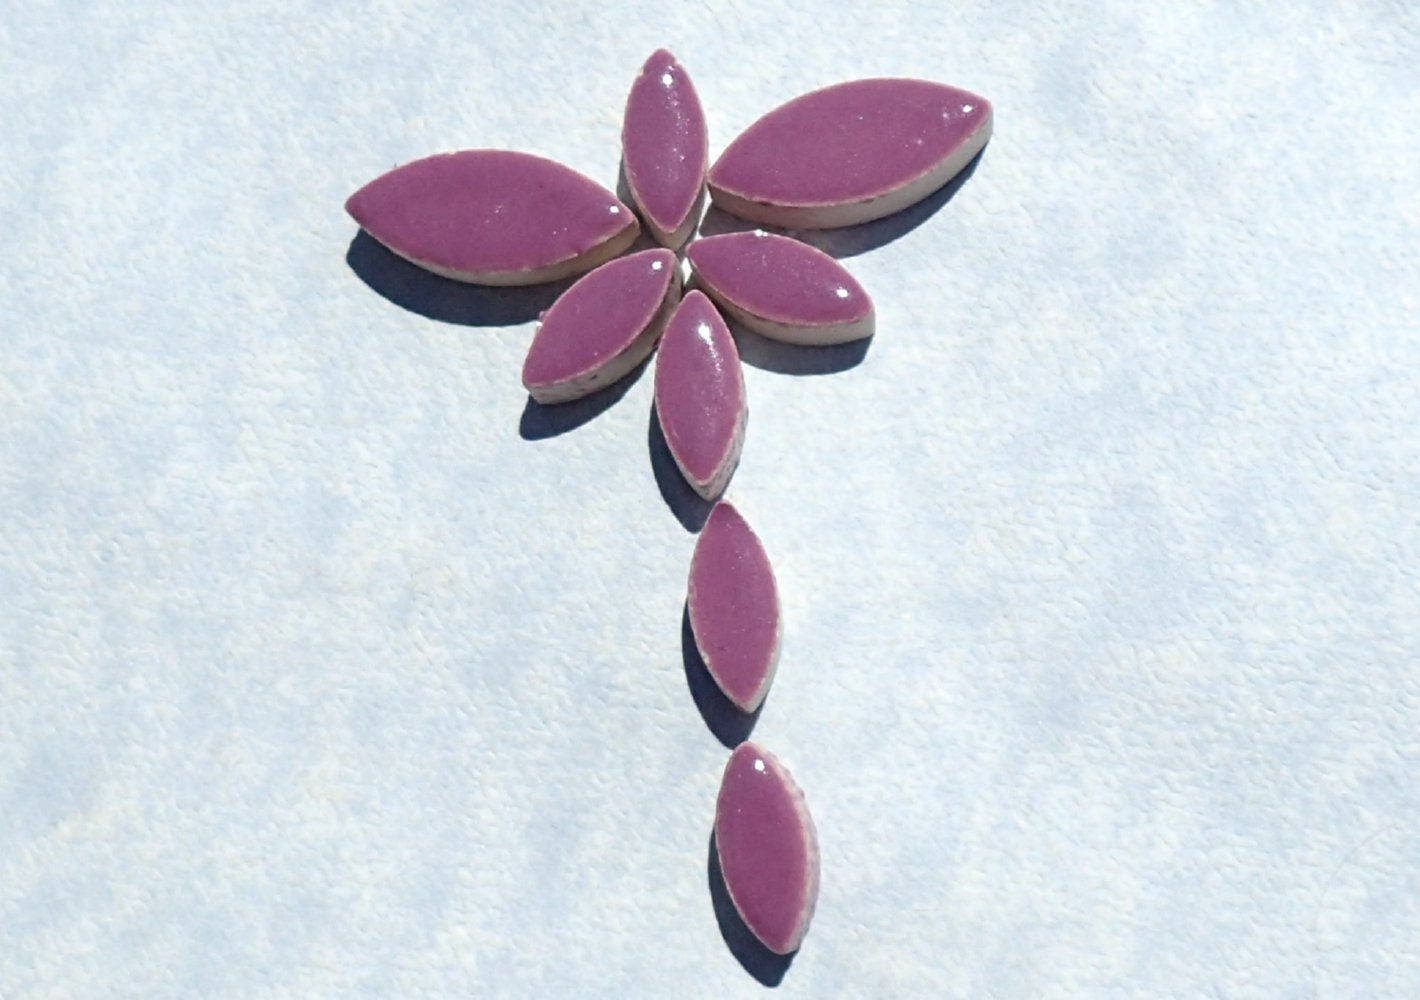 Pink Petals Mosaic Tiles - 50g Ceramic Leaves in Mix of 2 Sizes 1/2" and 3/4"